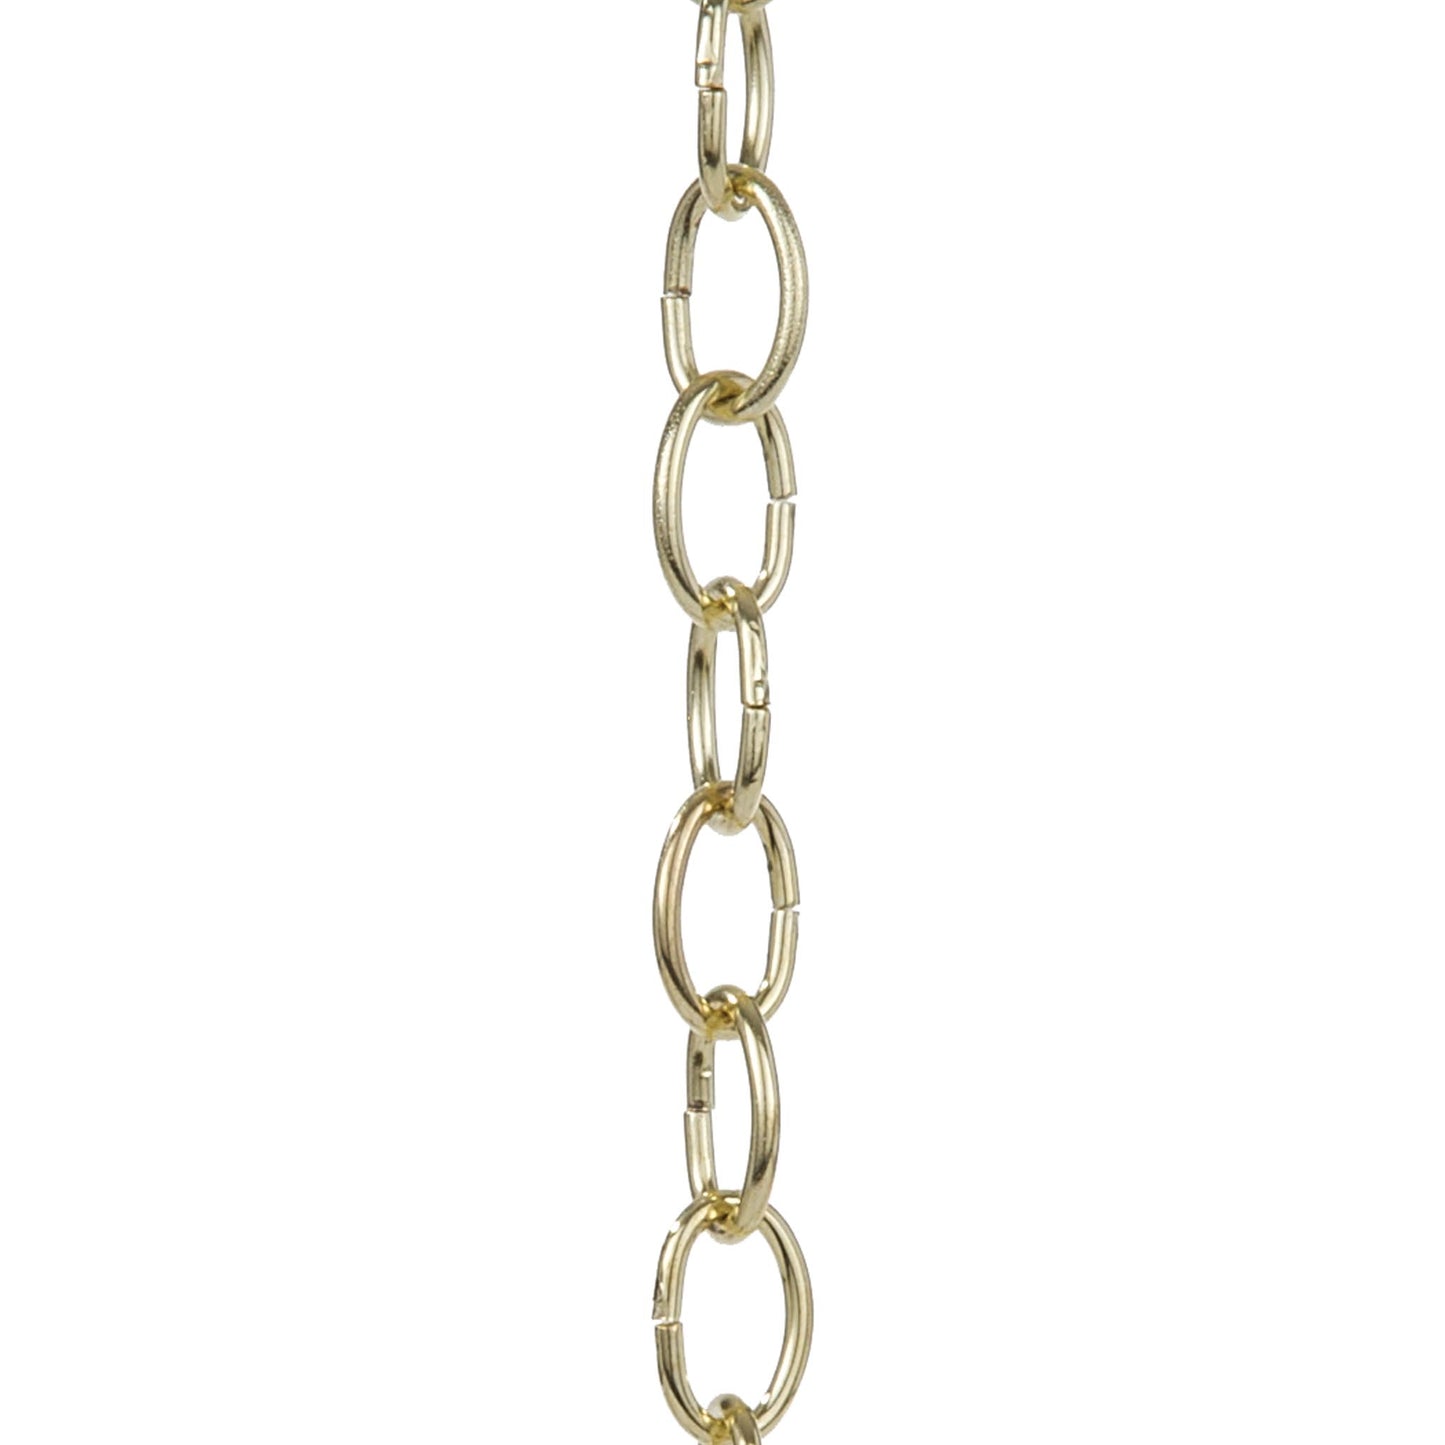 Baby Oval Steel Lamp Chain, 3/4" X 5/8" Links (13010)